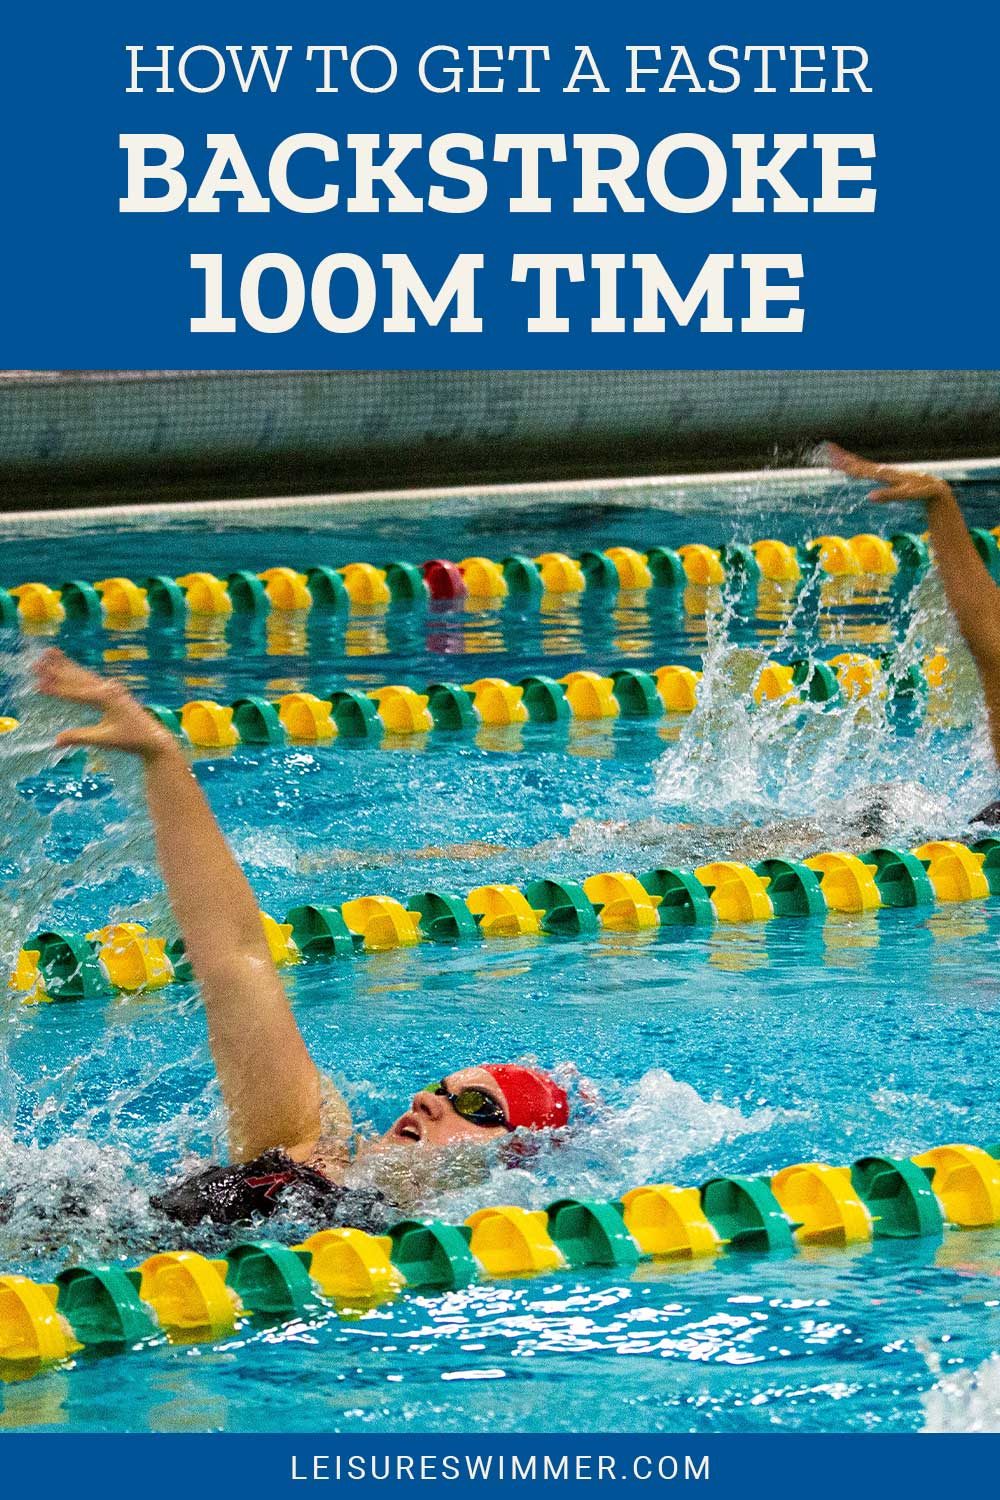 Woman doing backstroke - How To Get A Faster Backstroke 100M Time?